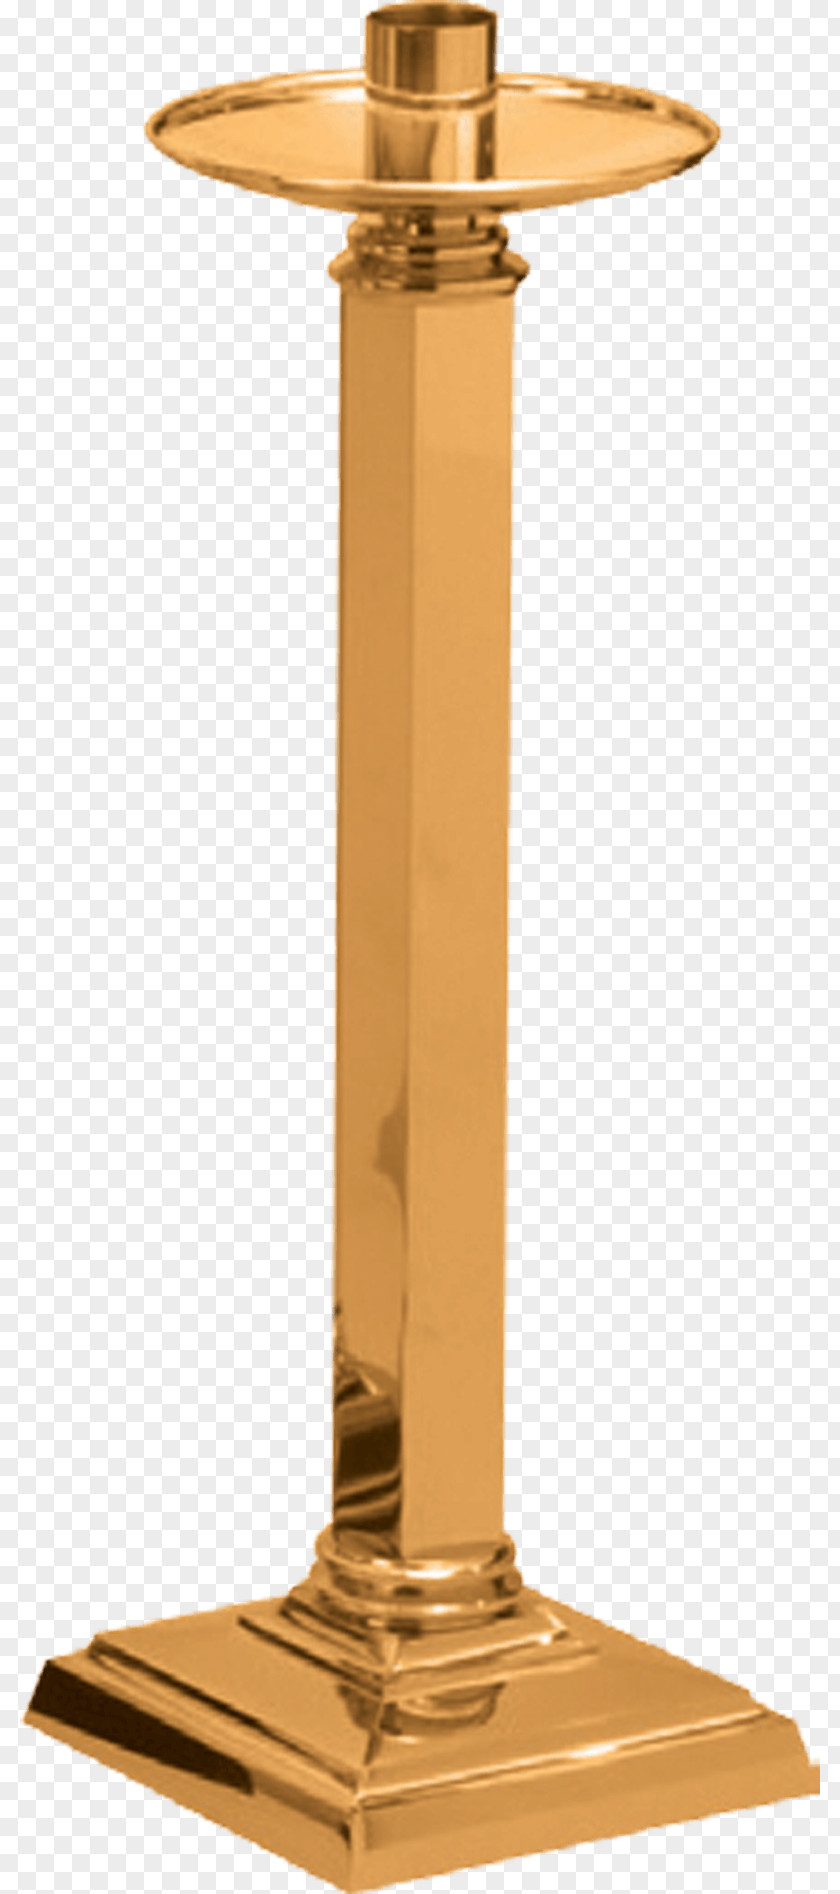 Design 01504 Paschal Candle PNG